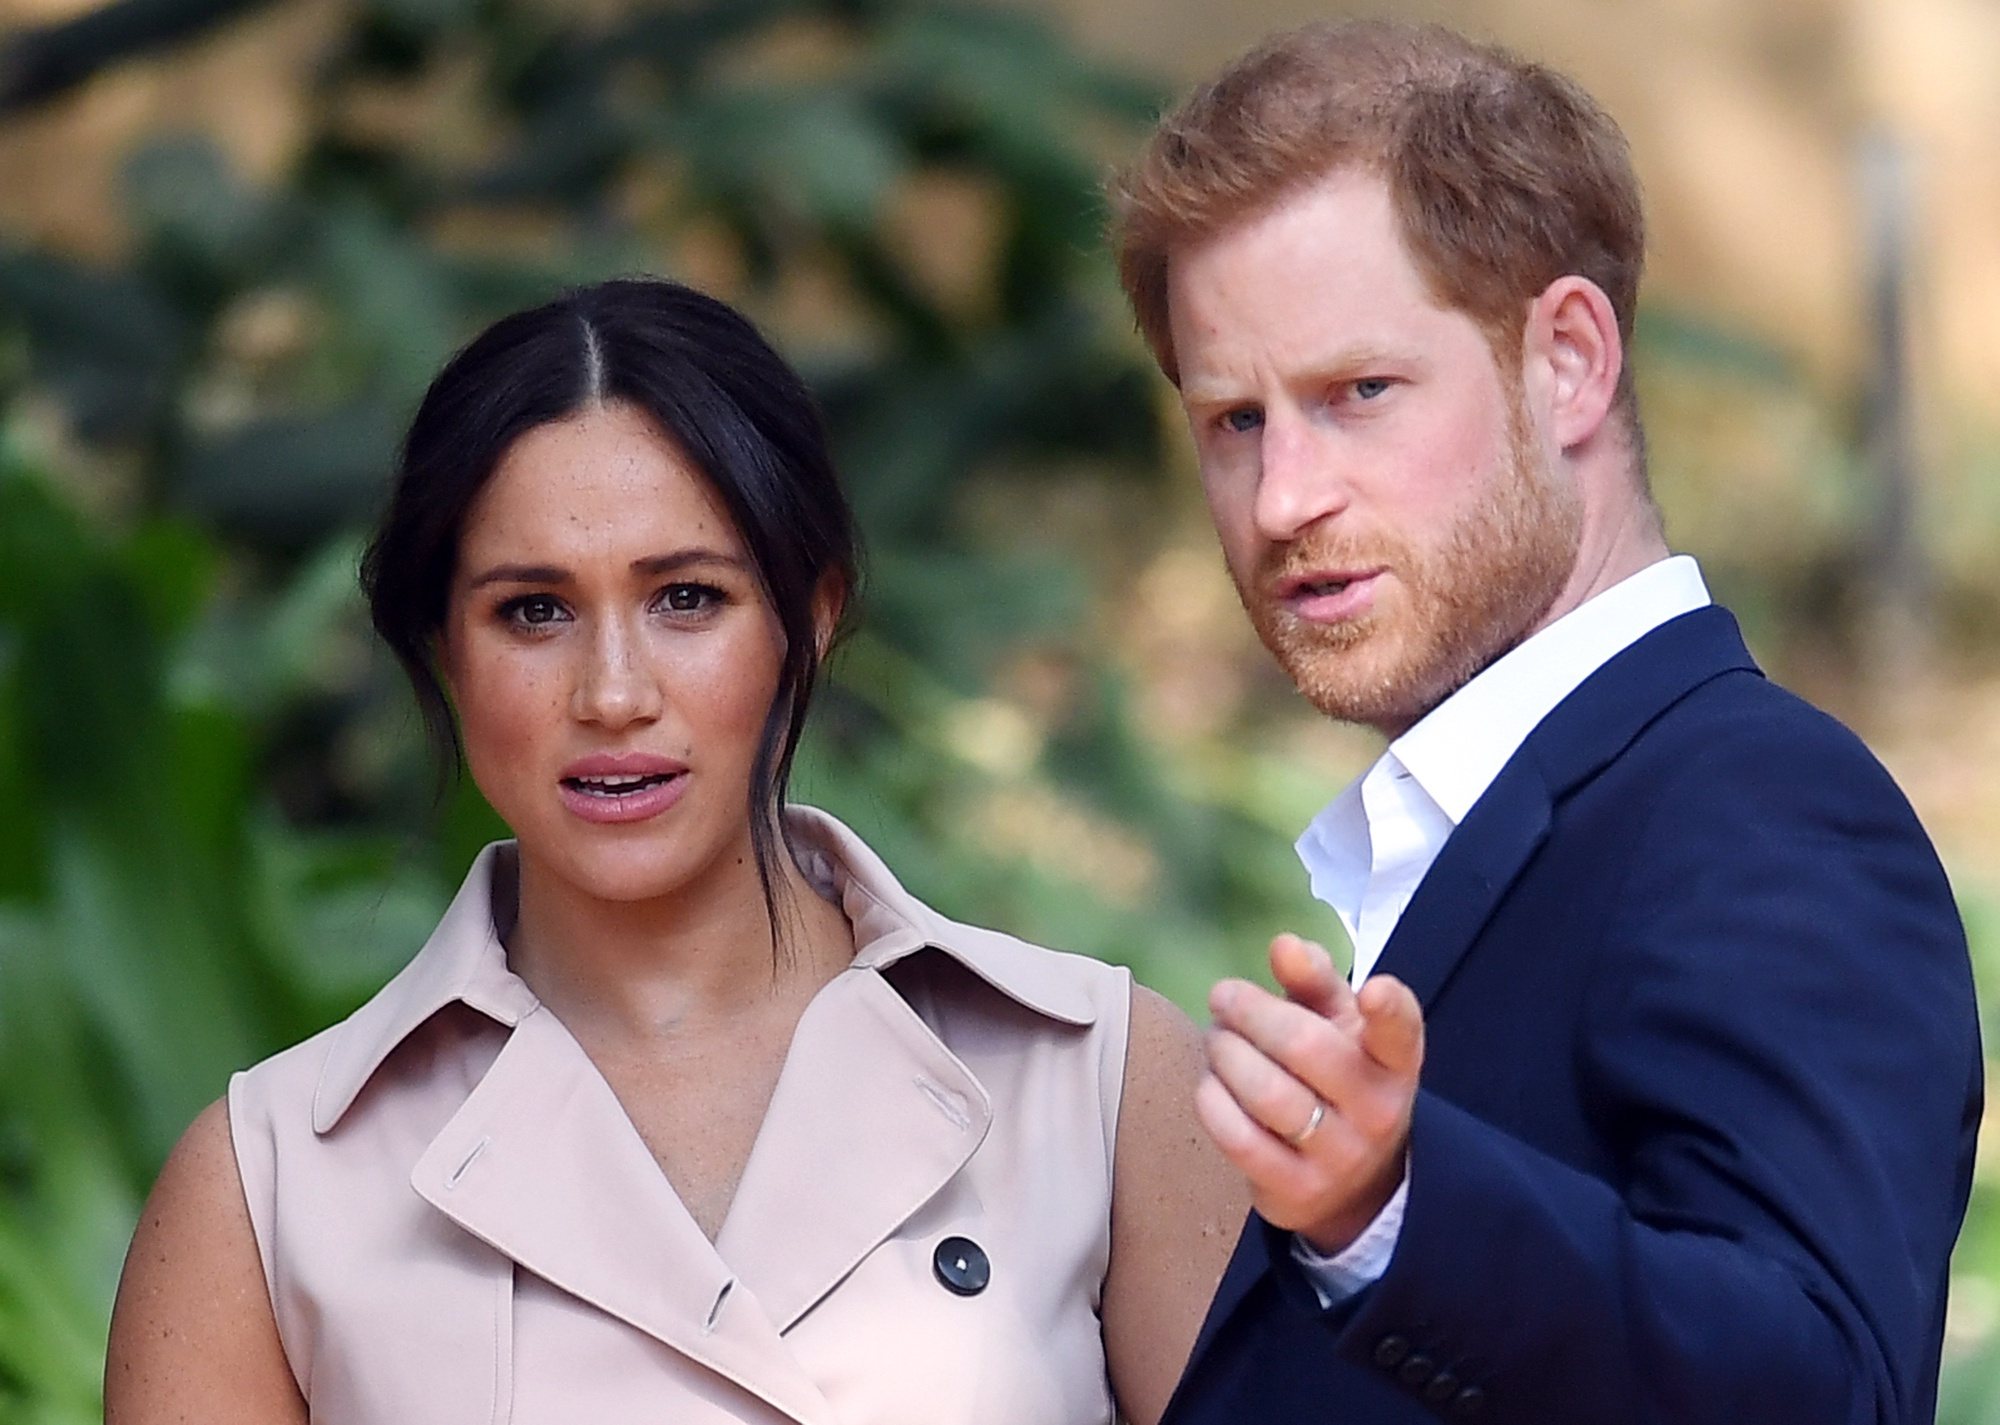 epa08395995 (FILE) Britain&#039;s Prince Harry, Duke of Sussex (R) and his wife Meghan, Duchess of Sussex attend a creative industries and business reception at the High Commissioner&#039;s residence in Johannesburg, South Africa, 02 October 2019 (reissued 01 May 2020). According to media reports on 01 May 2020, a judge at London&#039;s High Court ruled against key claims in a lawsuit brought by the Duchess of Sussex against The Mail on Sunday. The Duchess of Sussex is suing Associated Newspapers, the British tabloid&#039;s parent company, over privacy infringement and copyright breach after the Mail on Sunday published a private letter she sent to her father, Thomas Markle, berfore her wedding to Prince Harry.  EPA/FACUNDO ARRIZABALAGA *** Local Caption *** 55752202